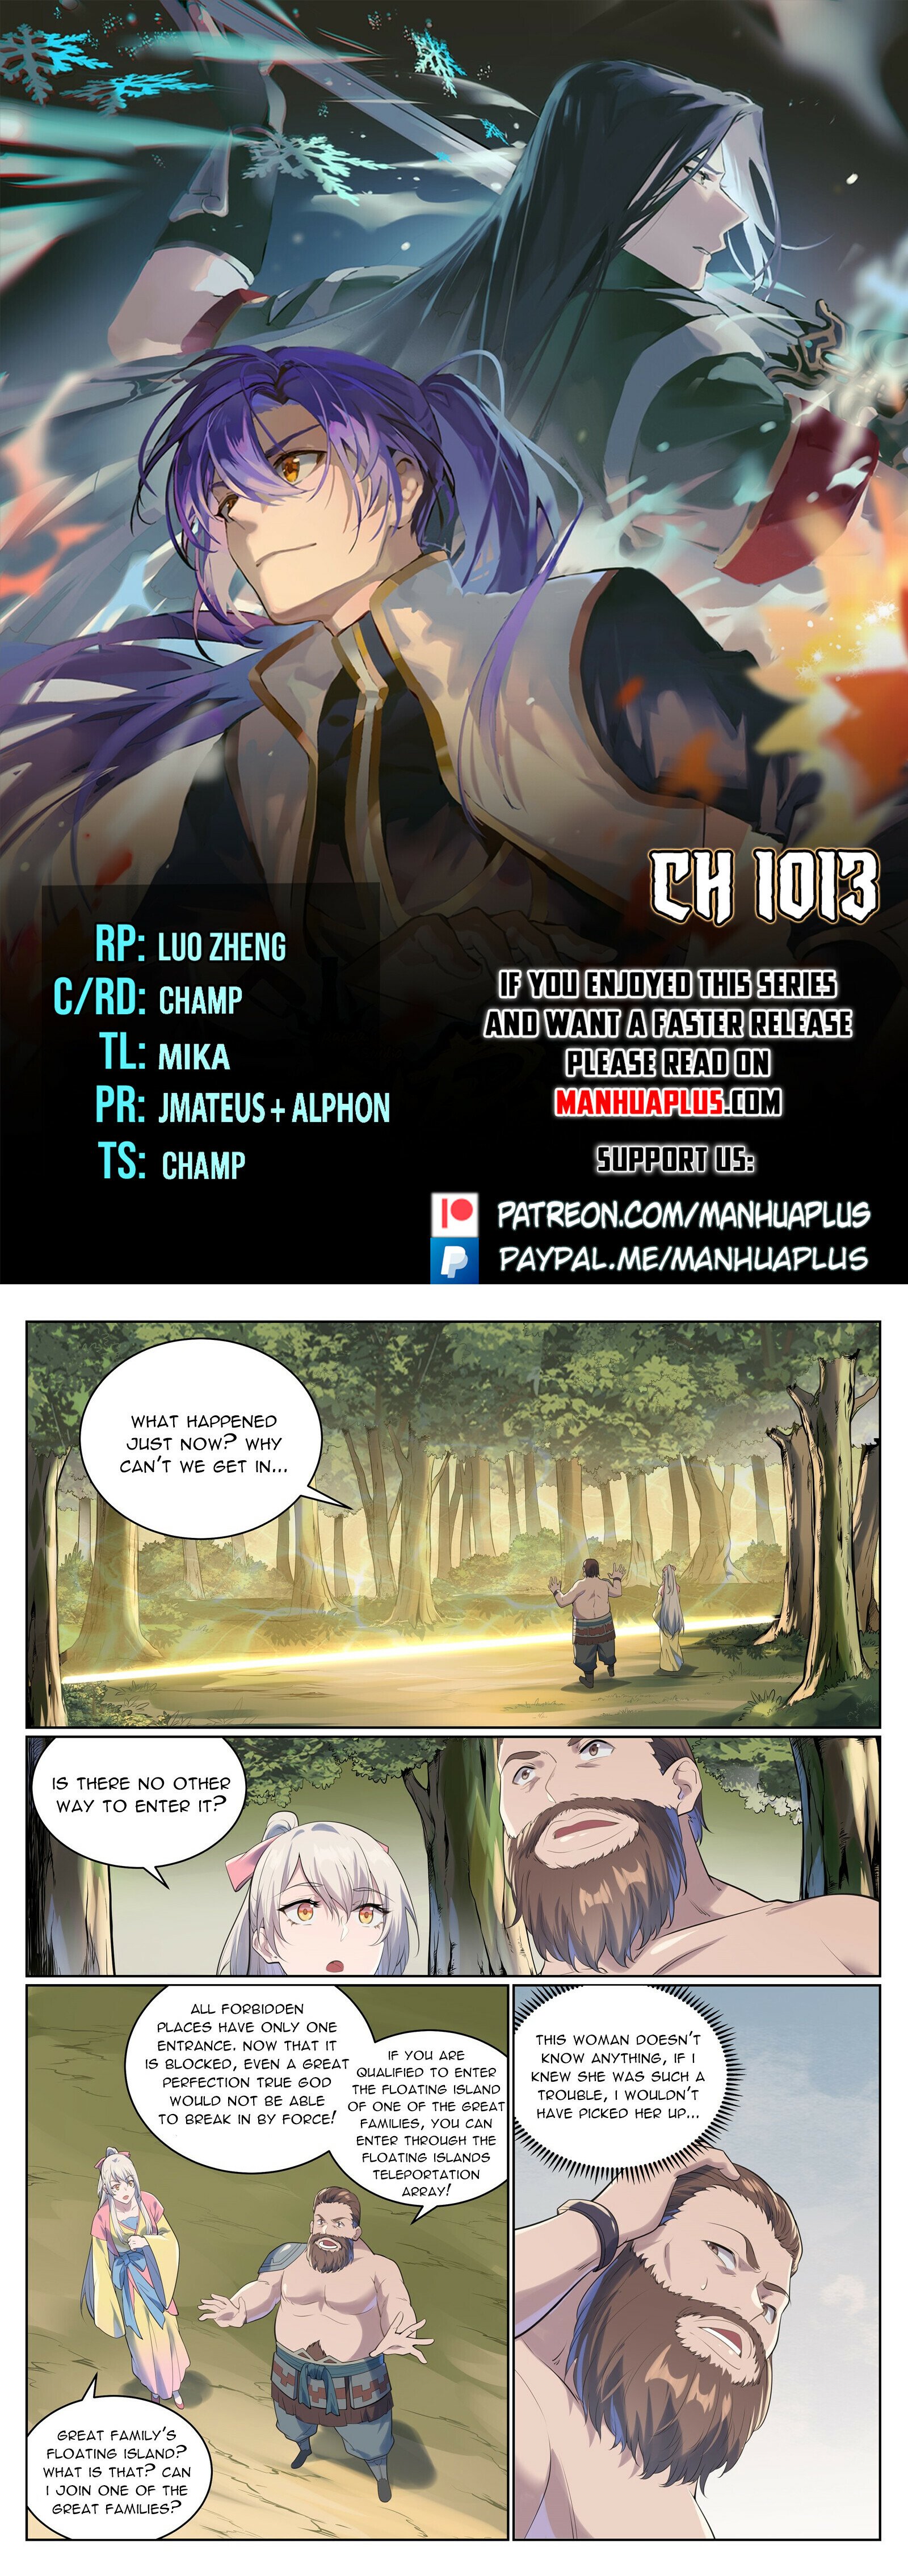 Apotheosis Chapter 1013 - Picture 1